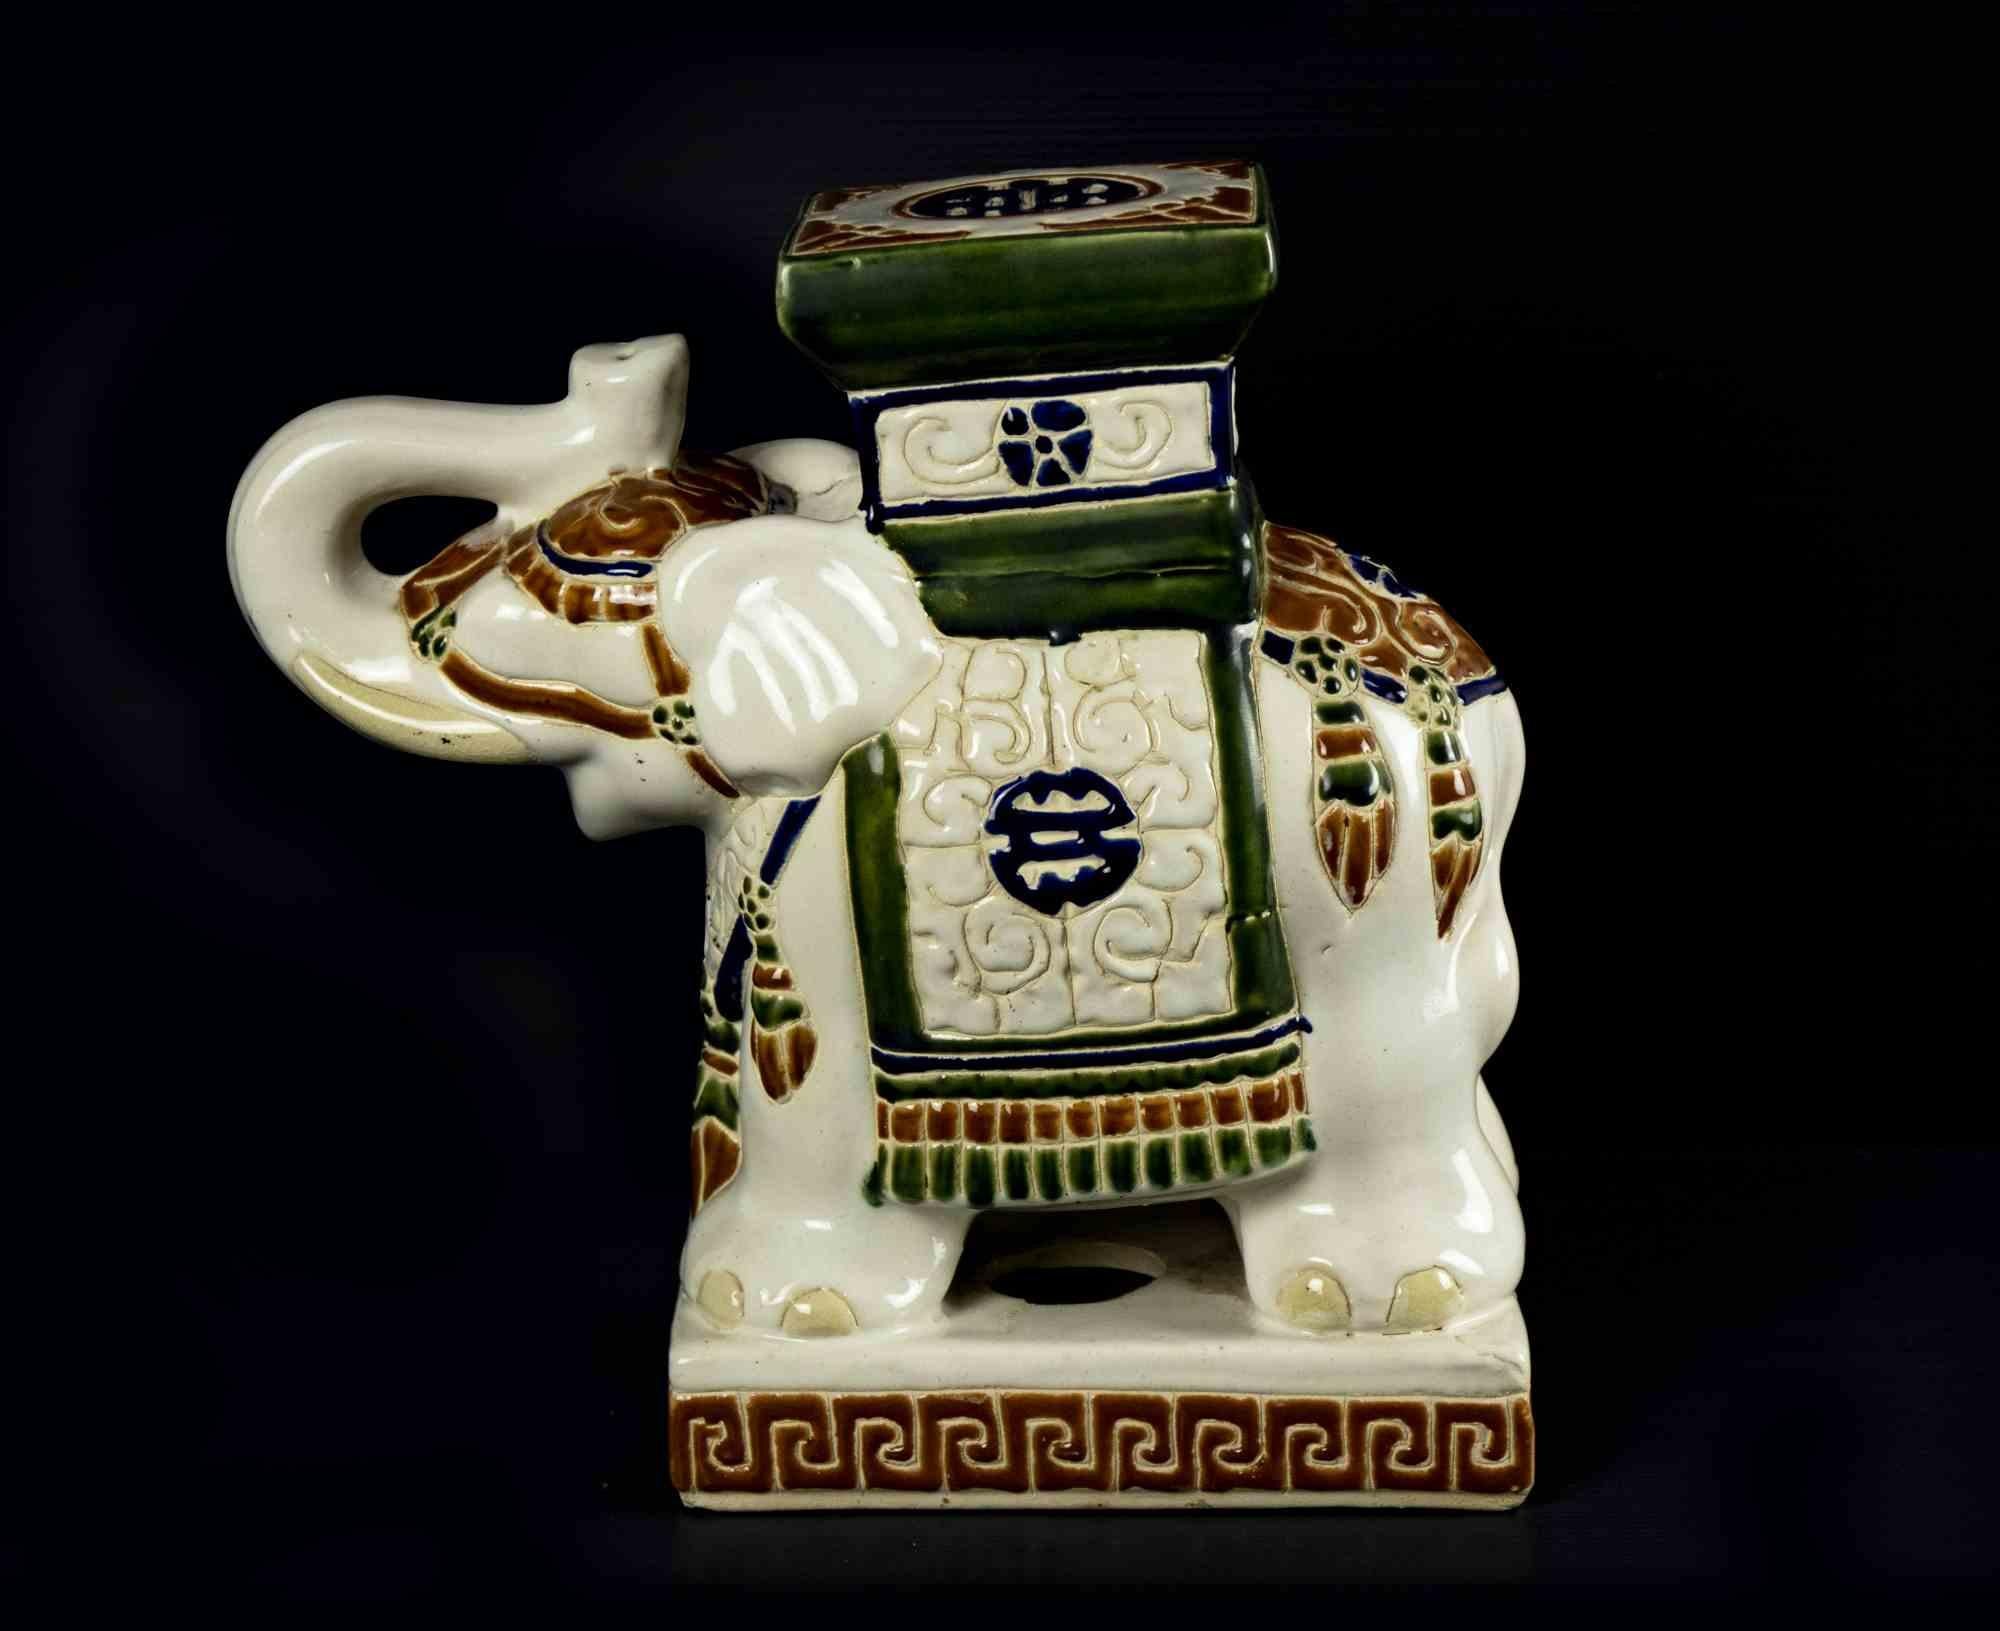 Good luck Elephant is an original decorative object realized in the 1970s.

An ornamental object realized in colored ceramic.

Good overall conditions except for some lack of colors on the ceramic surface. 

Elephant imagery in the home